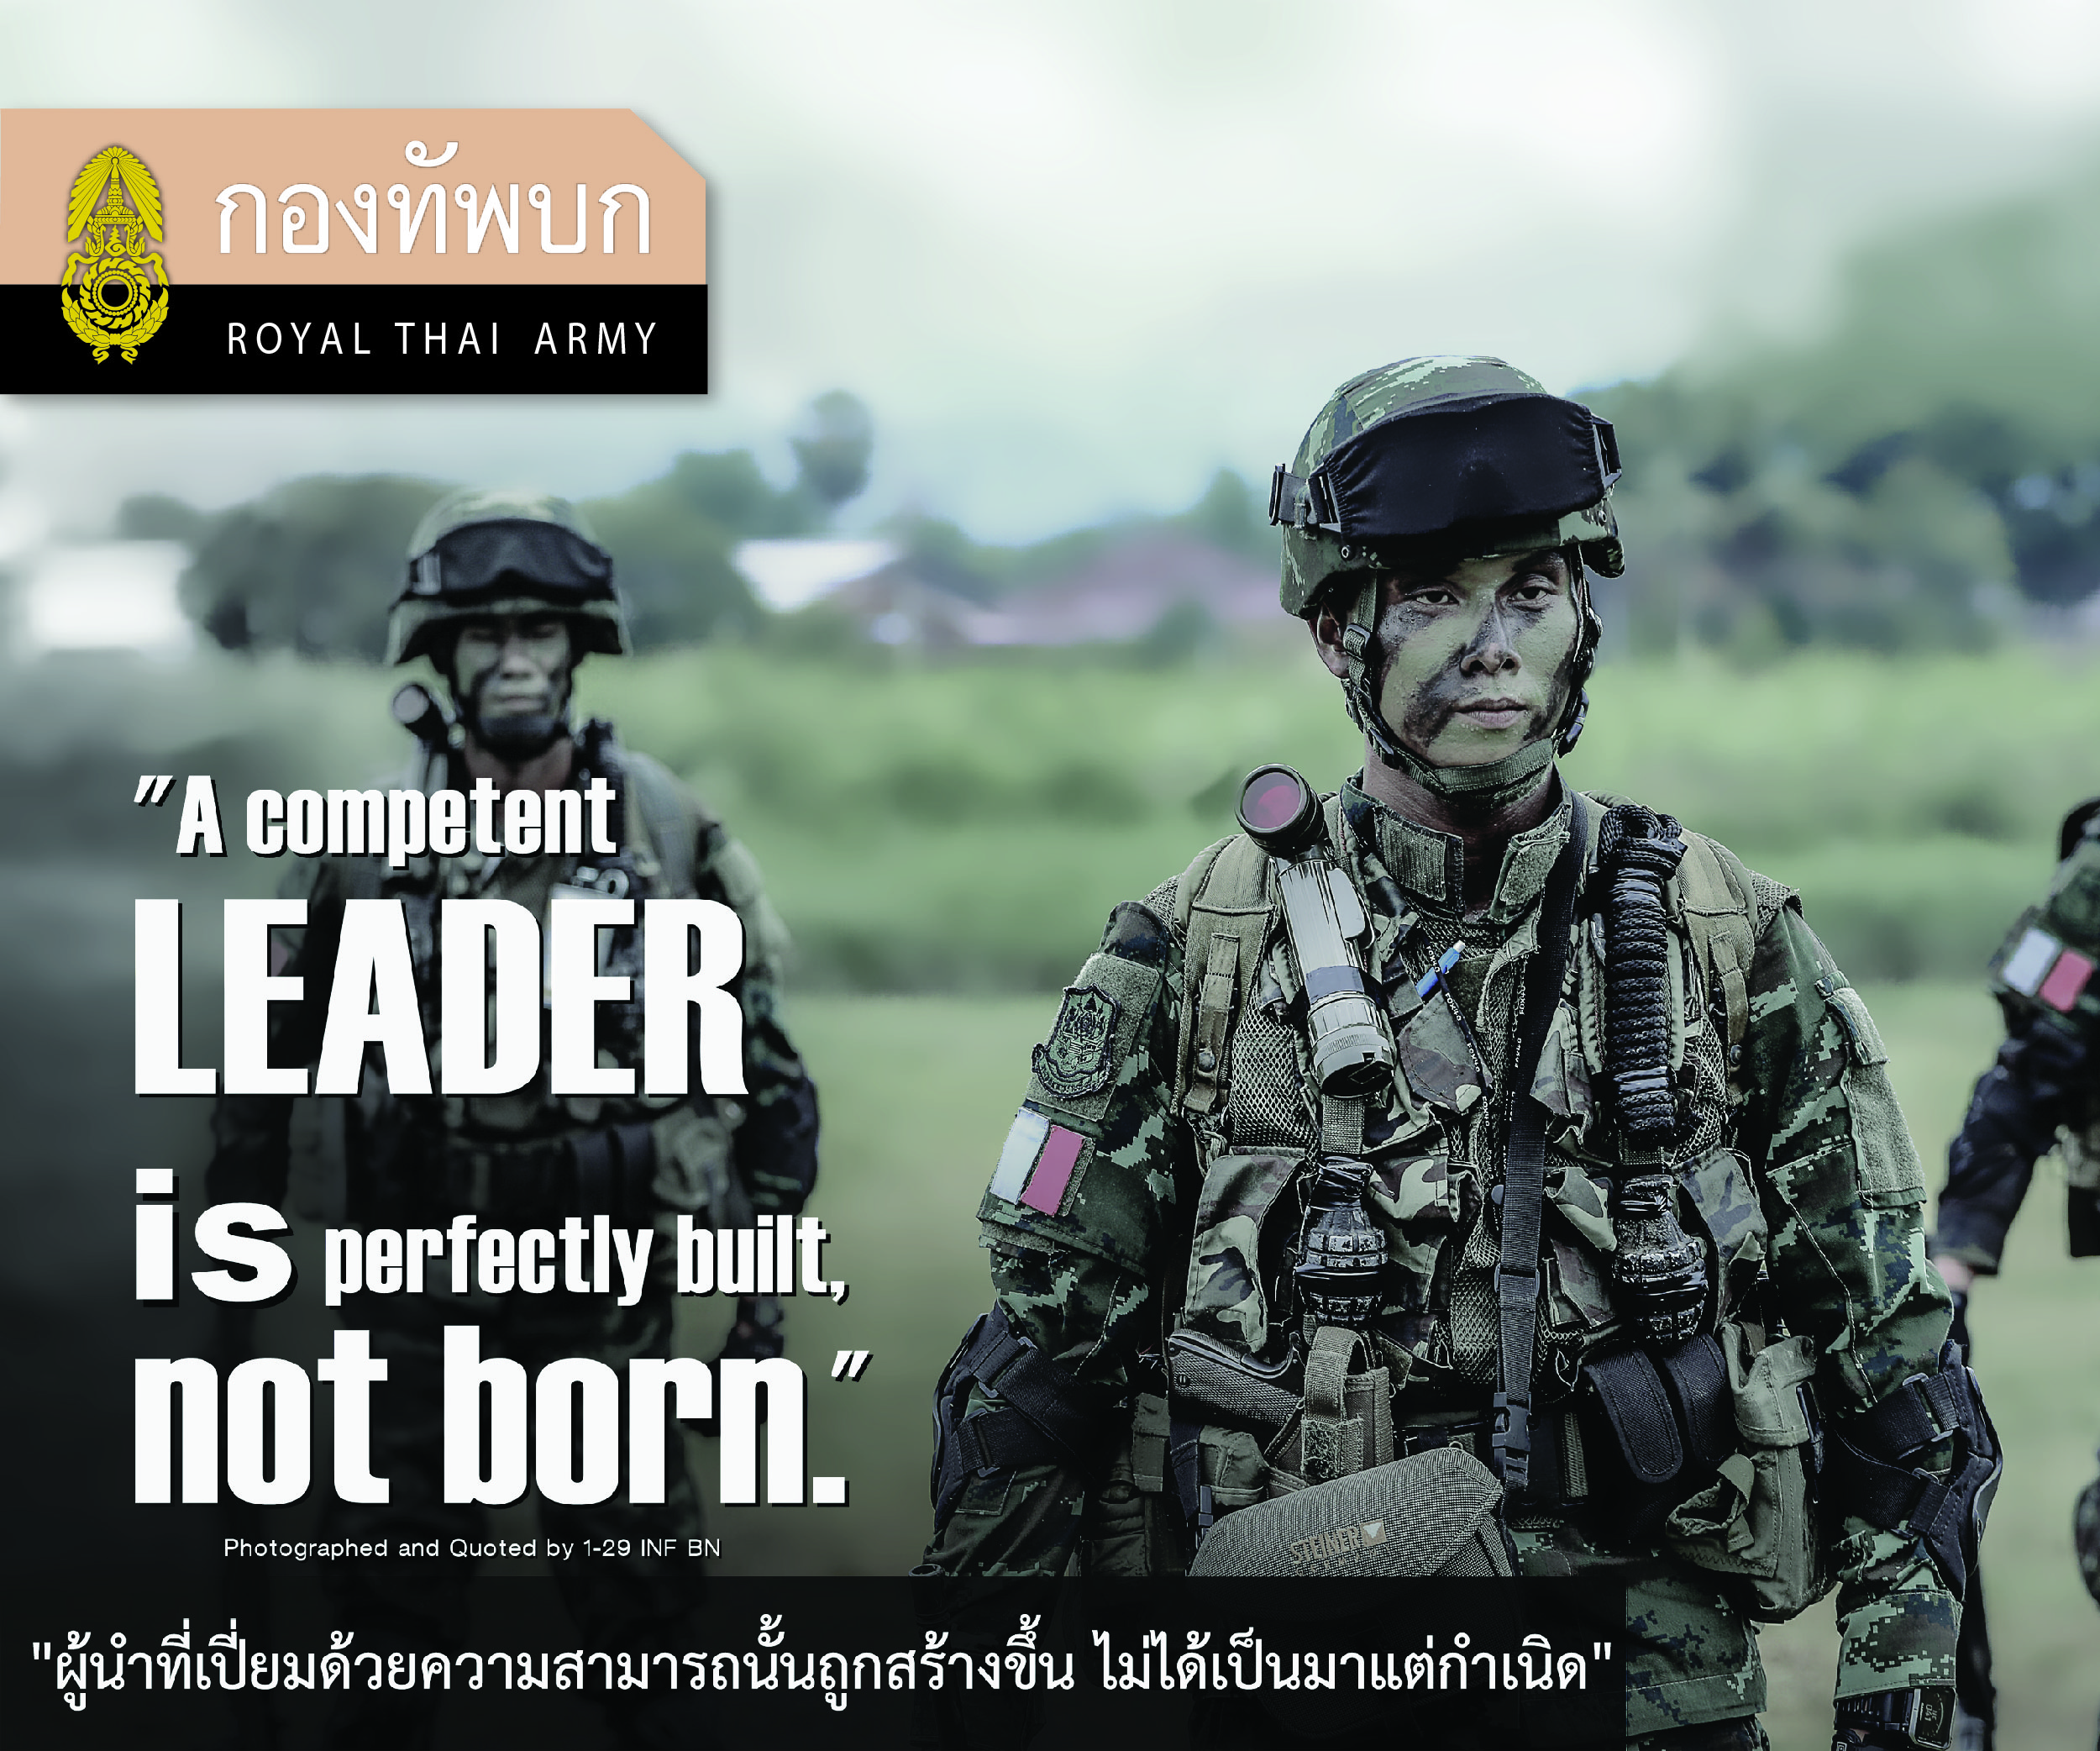 Competent Leader